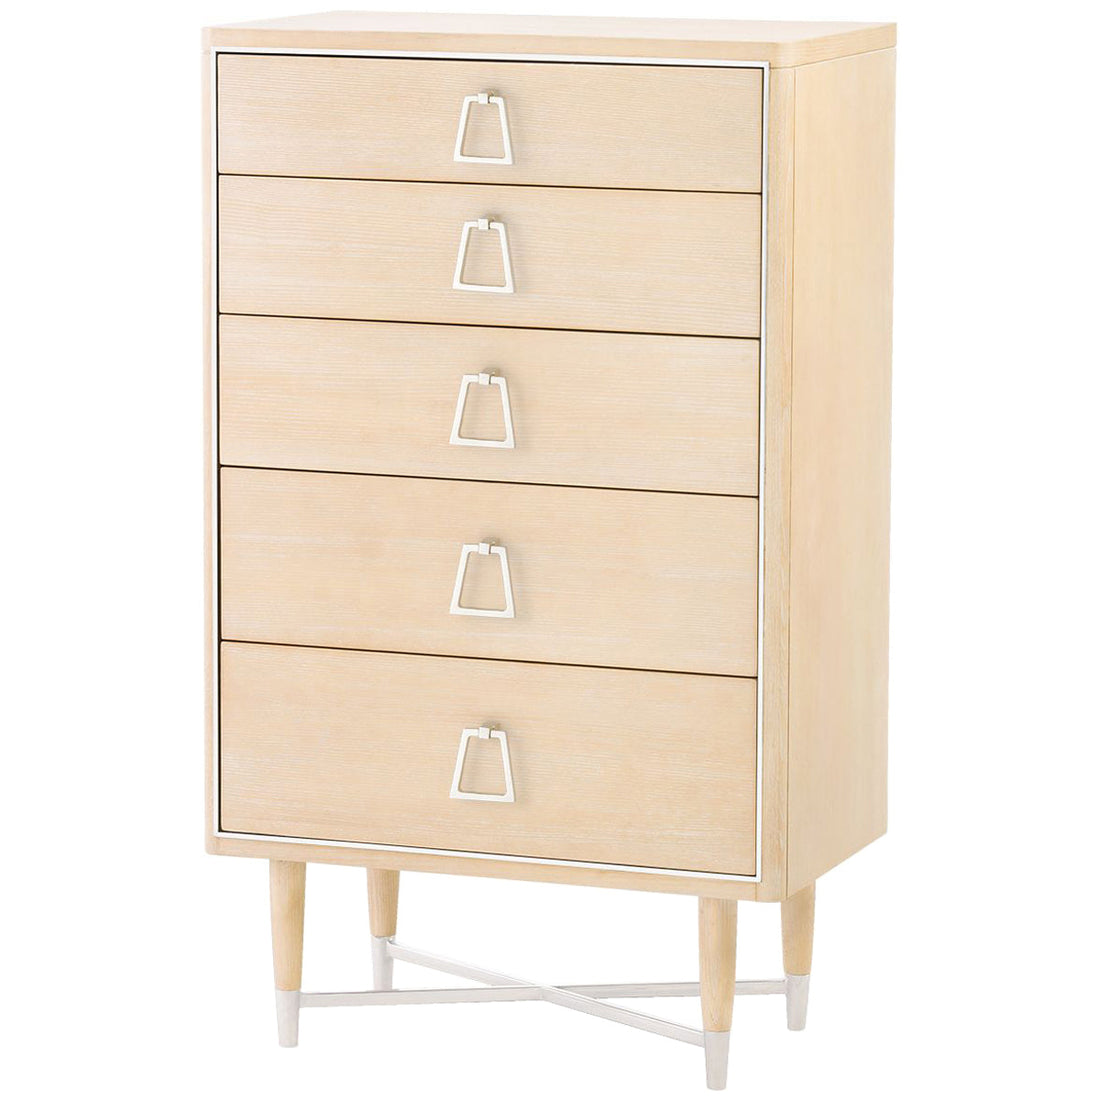 Villa & House Adrian Tall 5-Drawer Dresser with Kelley Pull